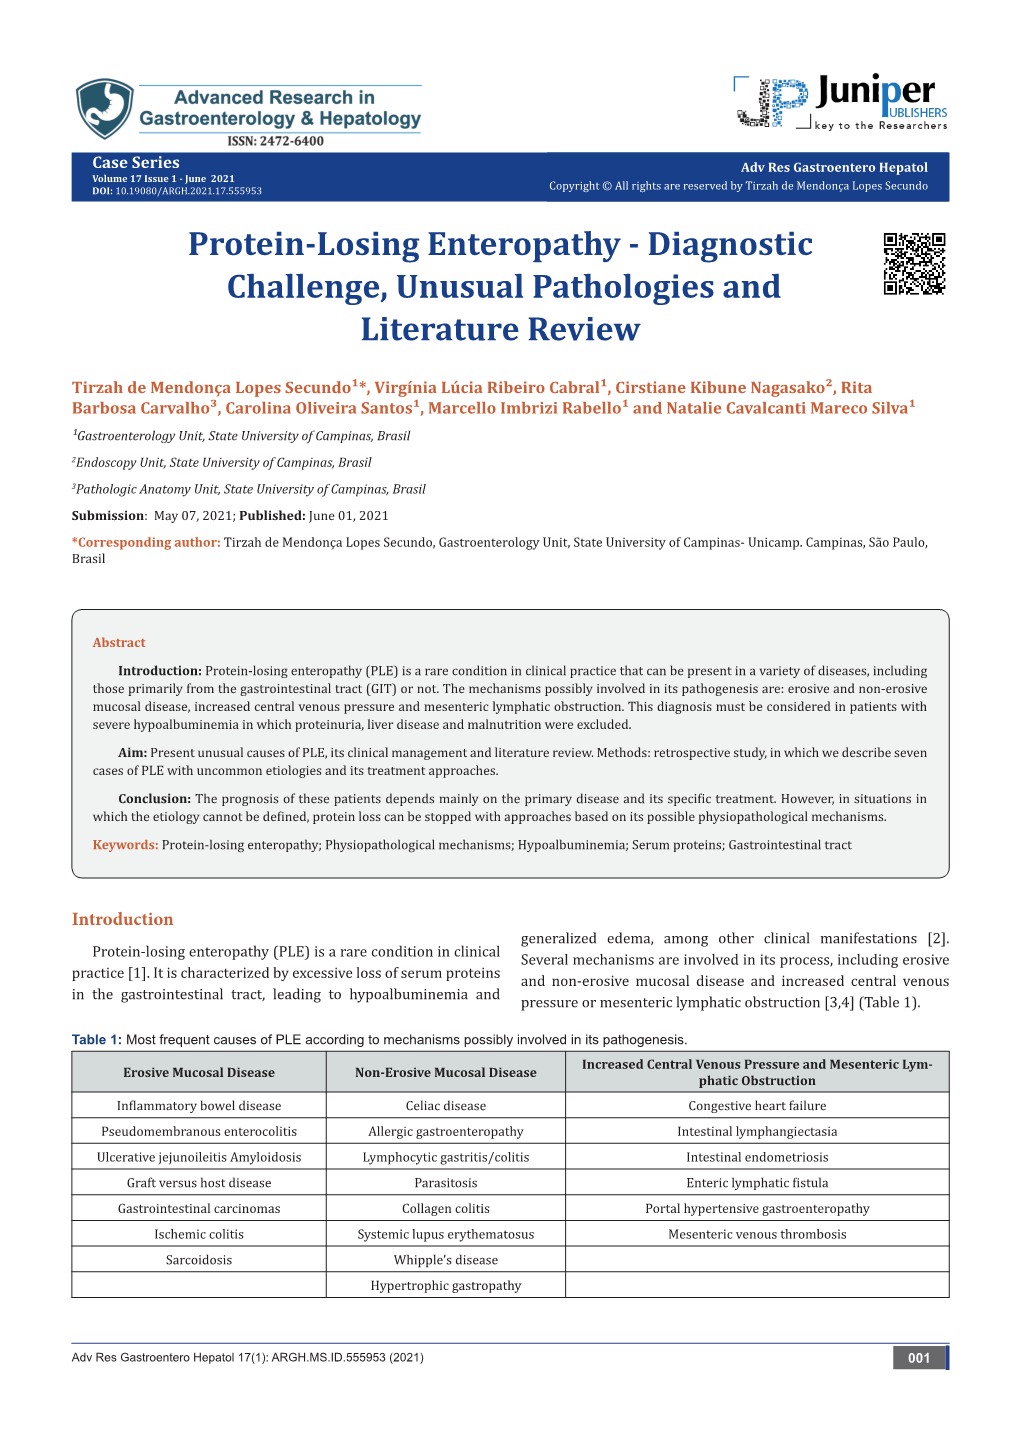 Protein-Losing Enteropathy - Diagnostic Challenge, Unusual Pathologies and Literature Review